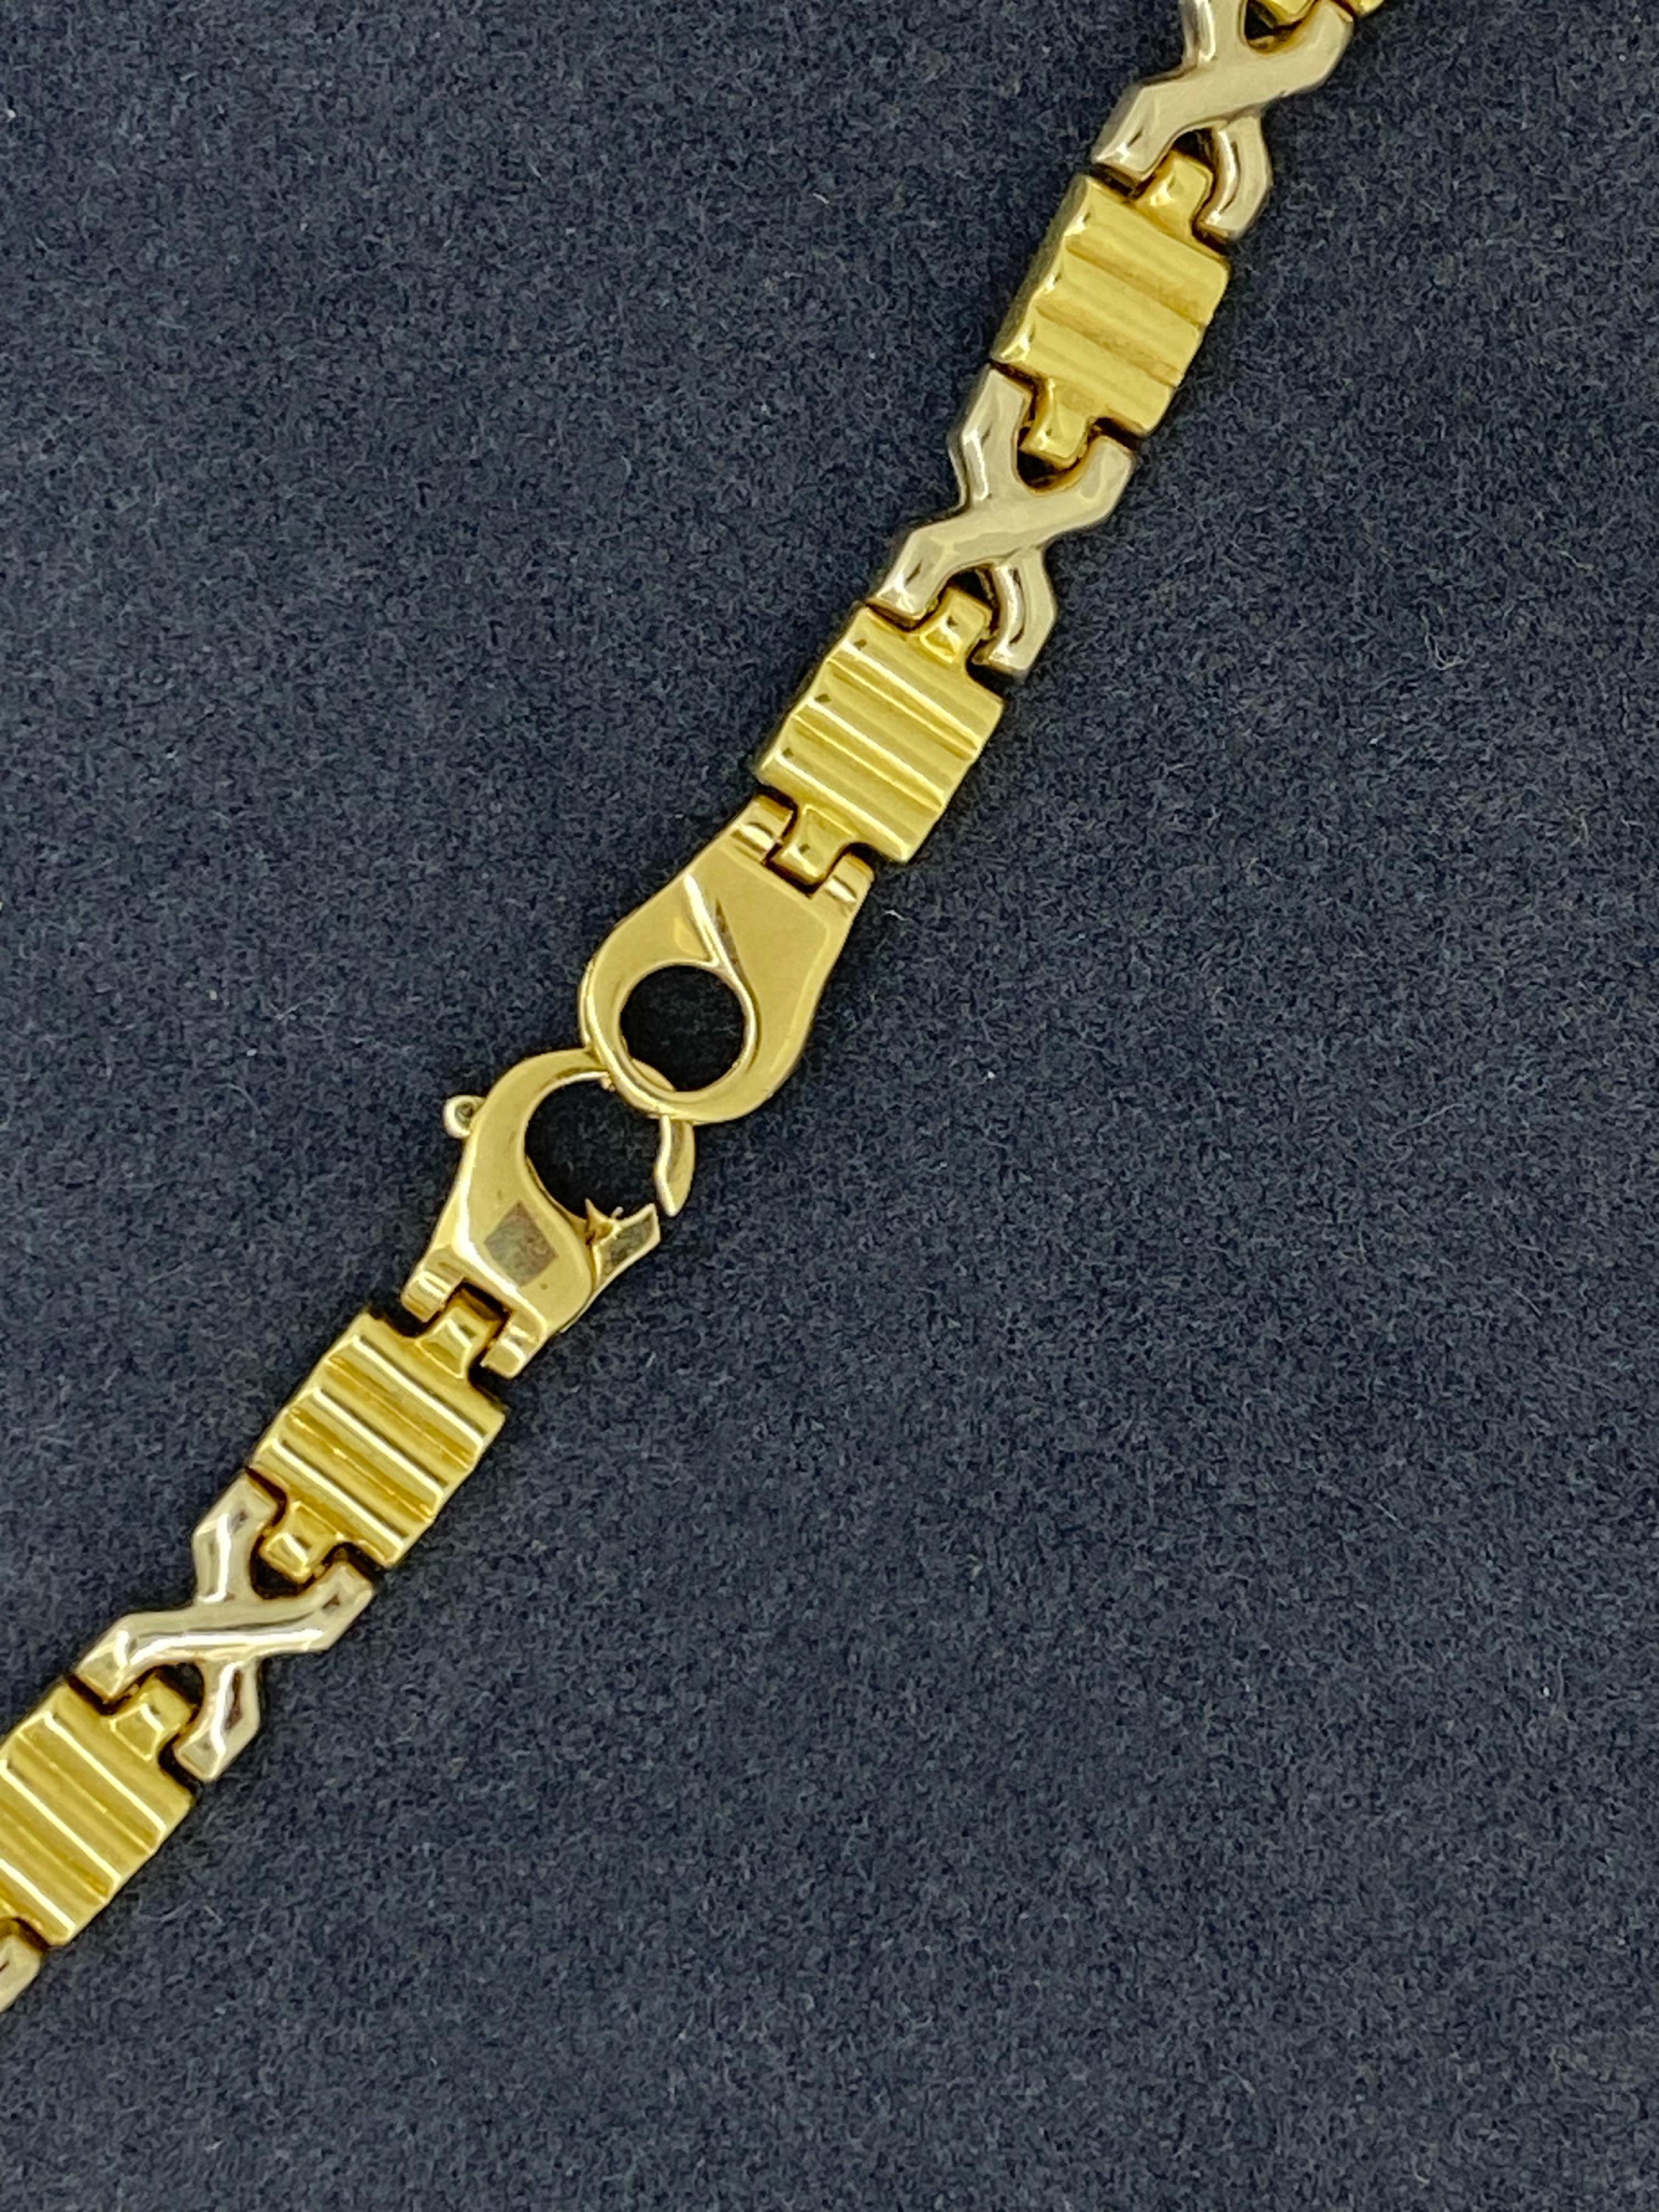 Magnificent Two-Tone 18K White Yellow Gold Italian Cross & Bar Links Necklace For Sale 6